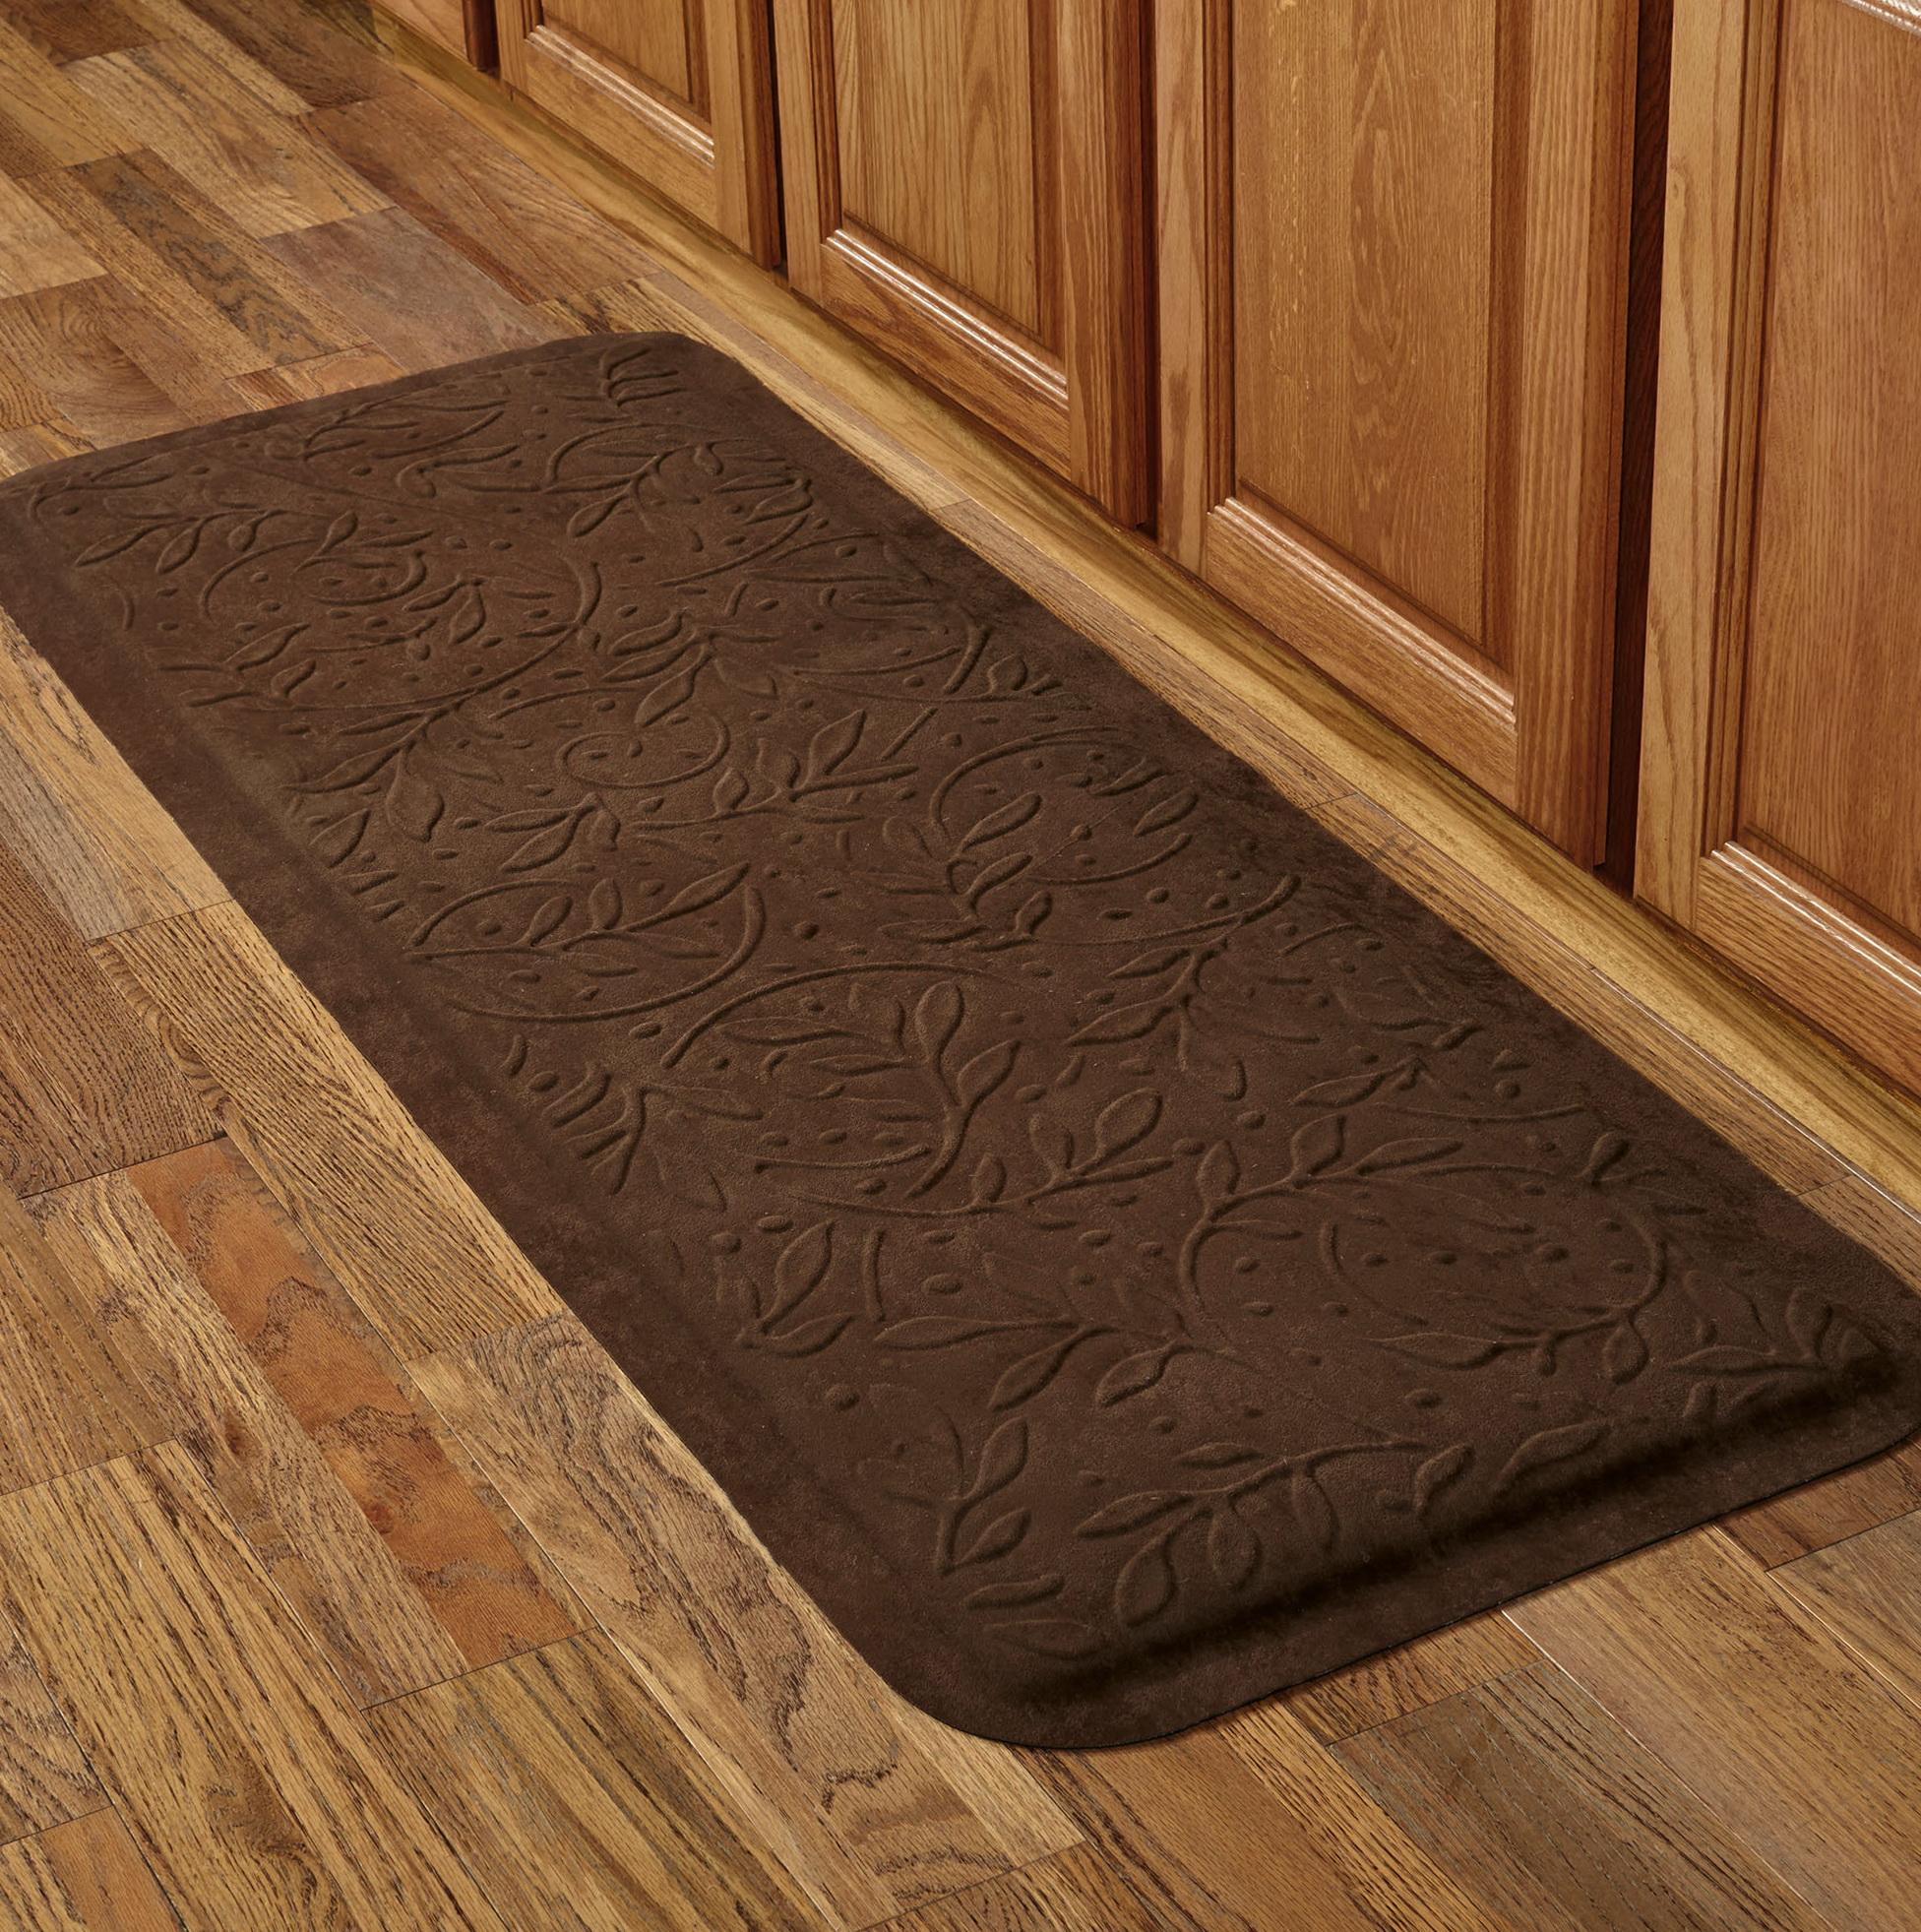 Cushioned Floor Mats For Kitchen | Home Design Ideas